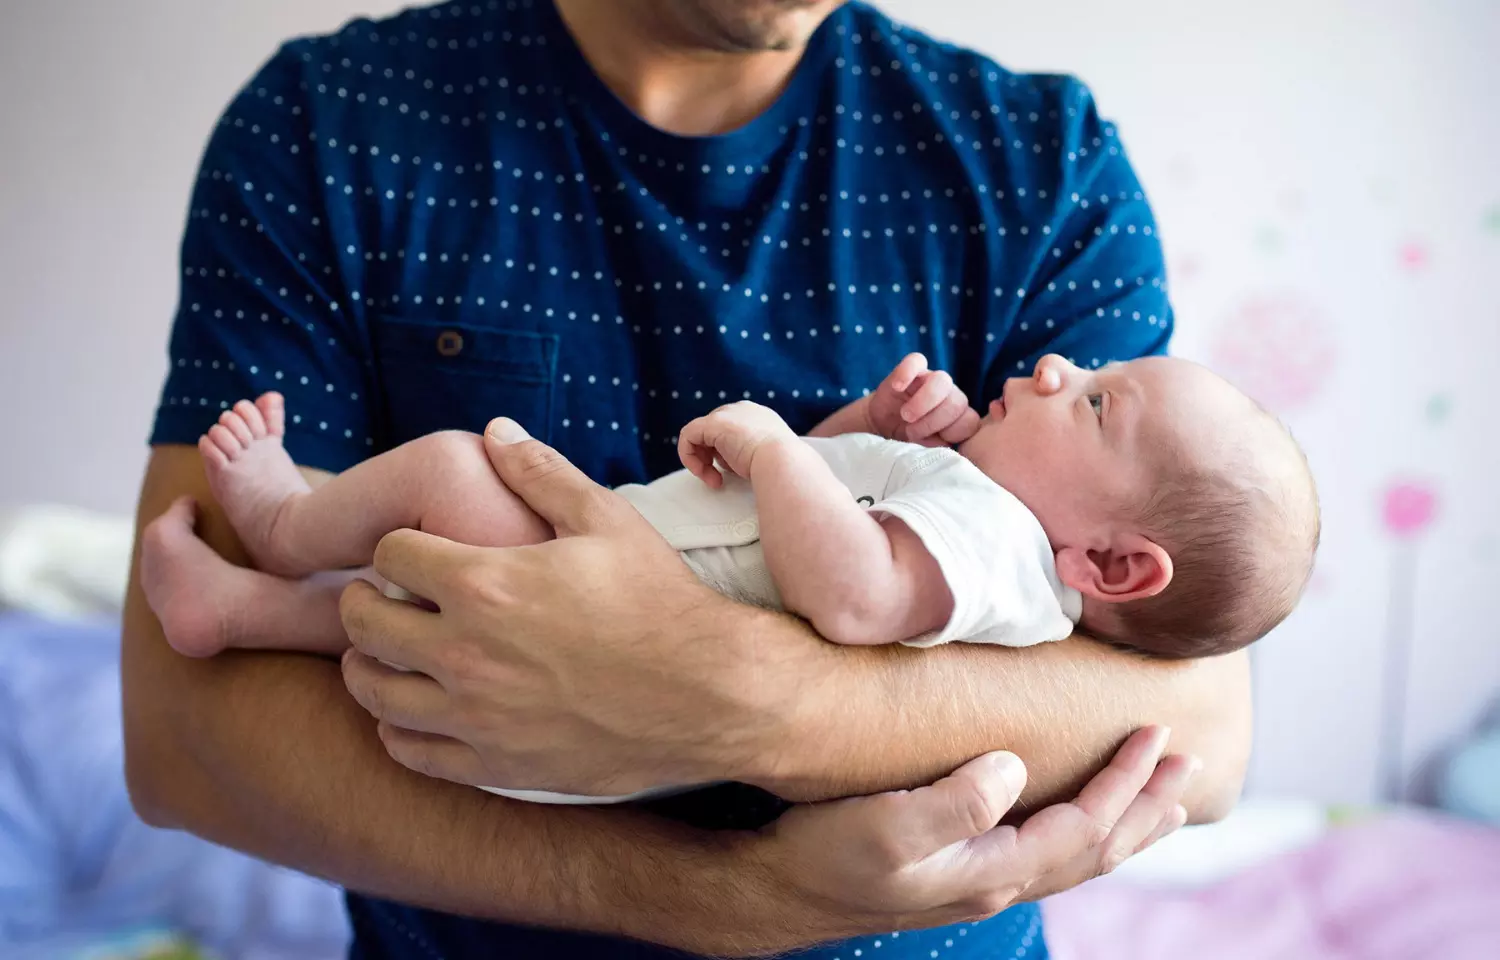 Delaying fatherhood reduces success of assisted reproduction technology: Study